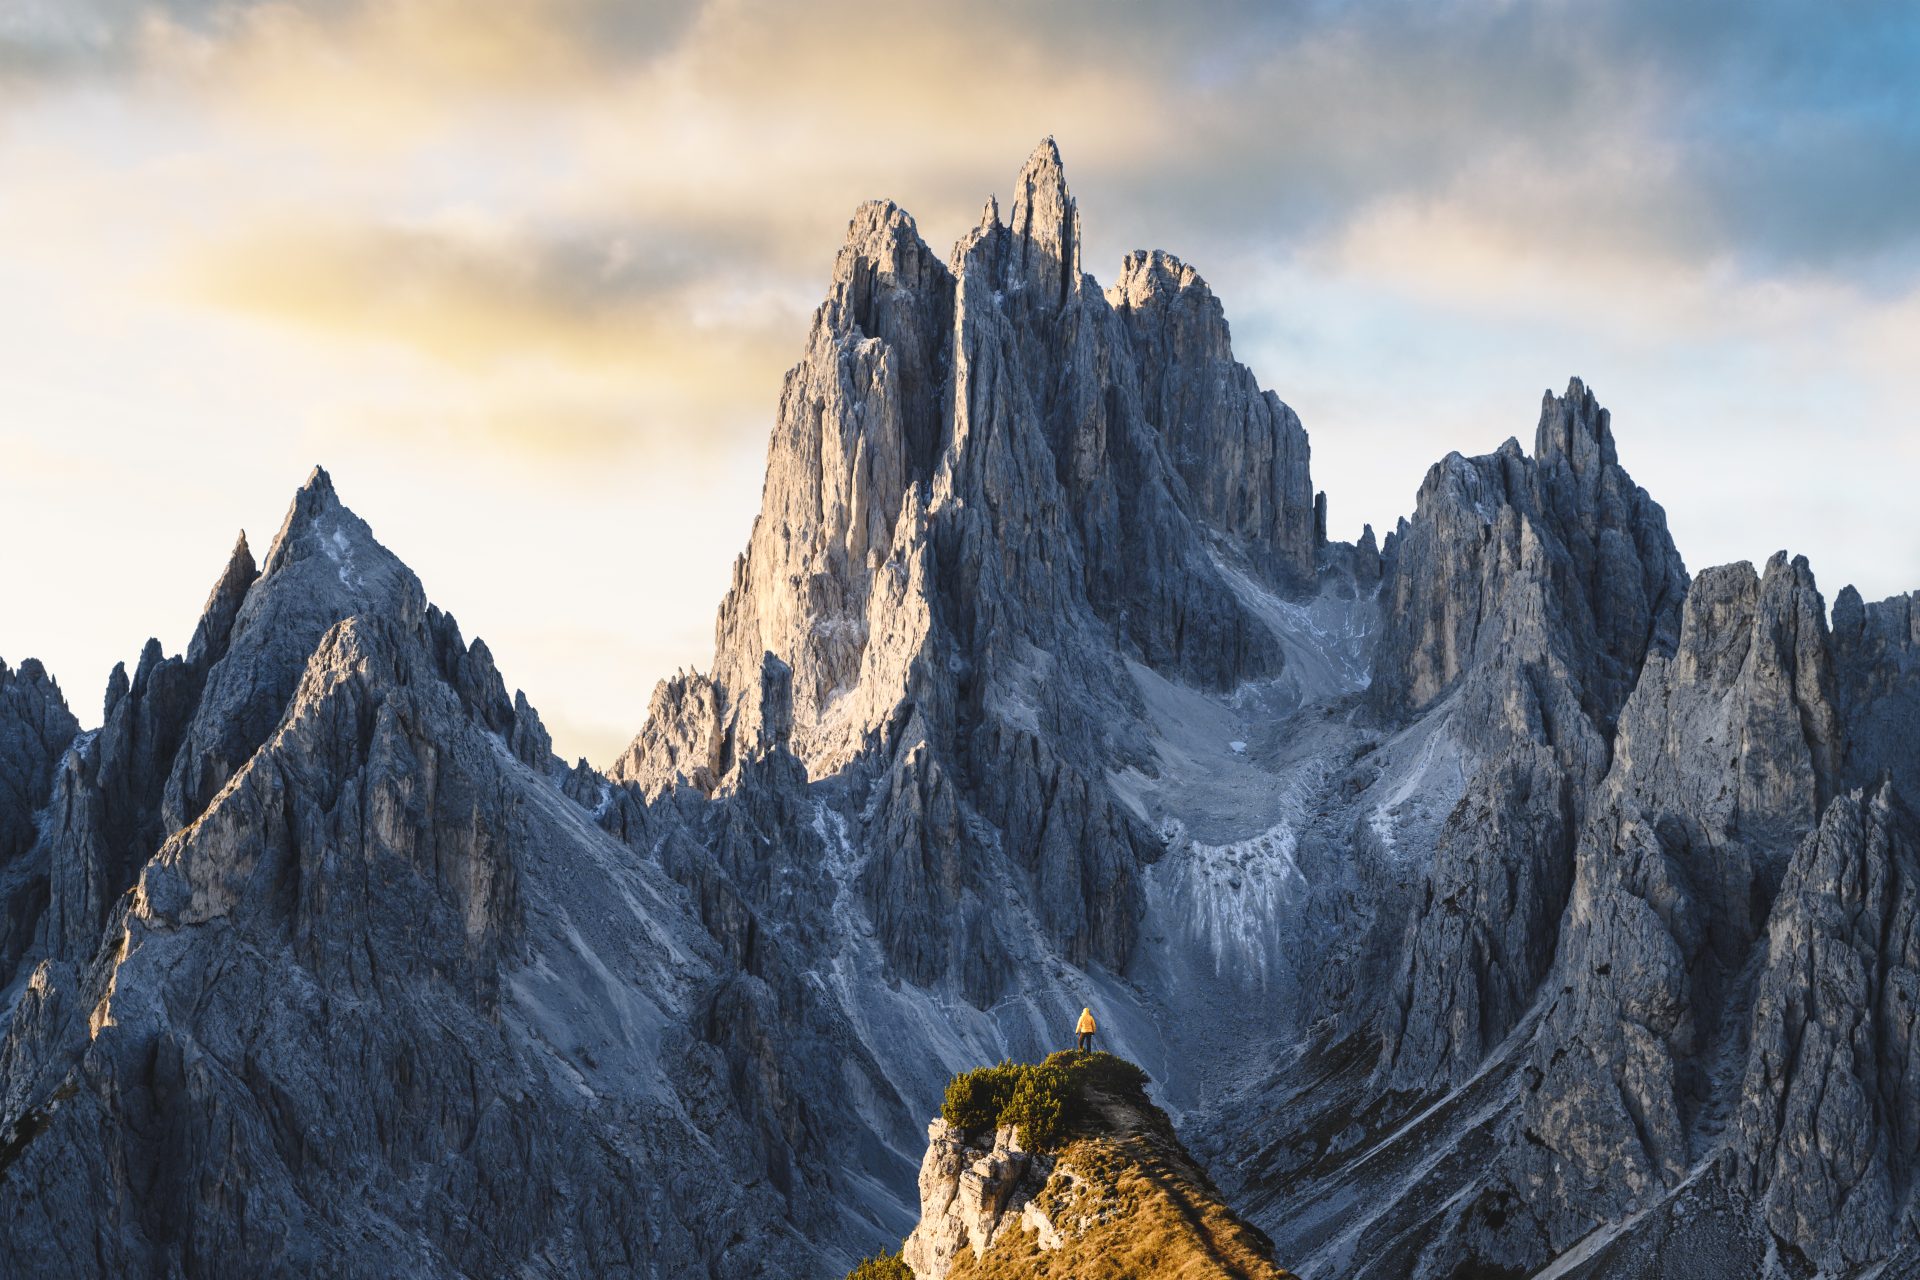 <p>In northern Italy, the Dolomites are a set of 20 peaks culminating at an altitude of over 3,000 meters, famous for their verticality. There are several routes between its walls and peaks, to choose from depending on your level of hiking.</p>